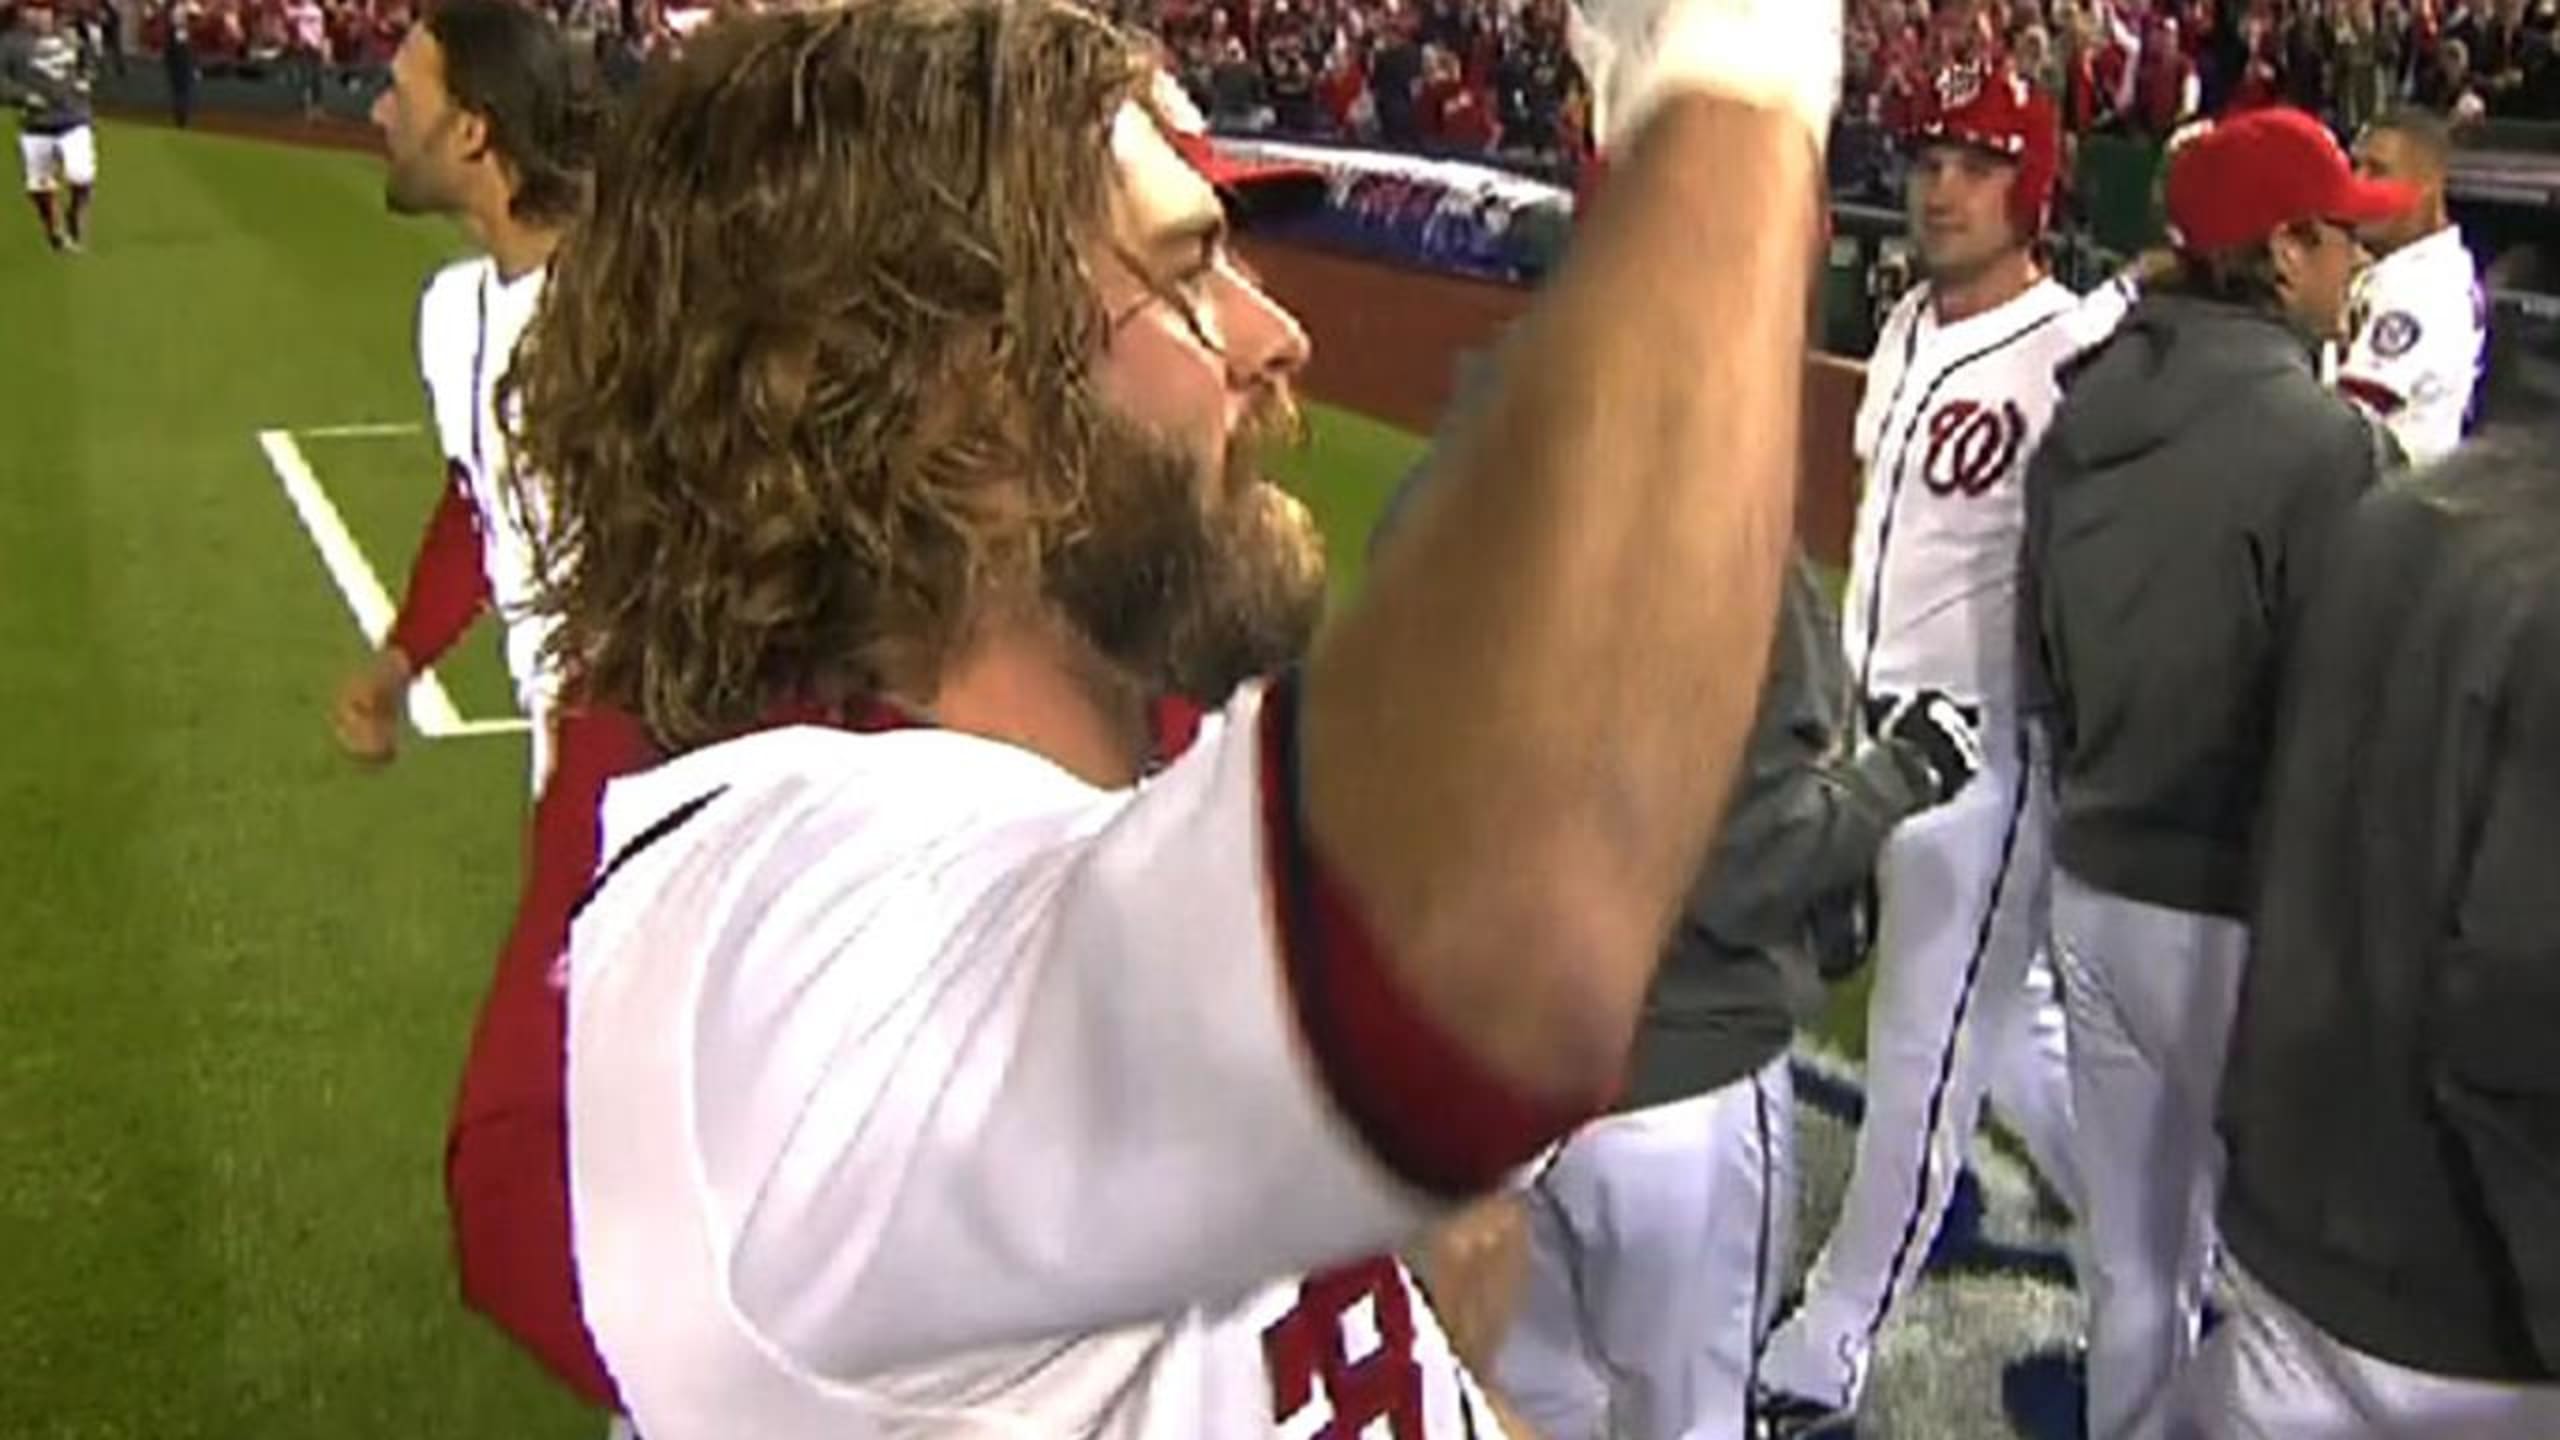 The star of Section 105, Jayson Werth has a big birthday on Friday